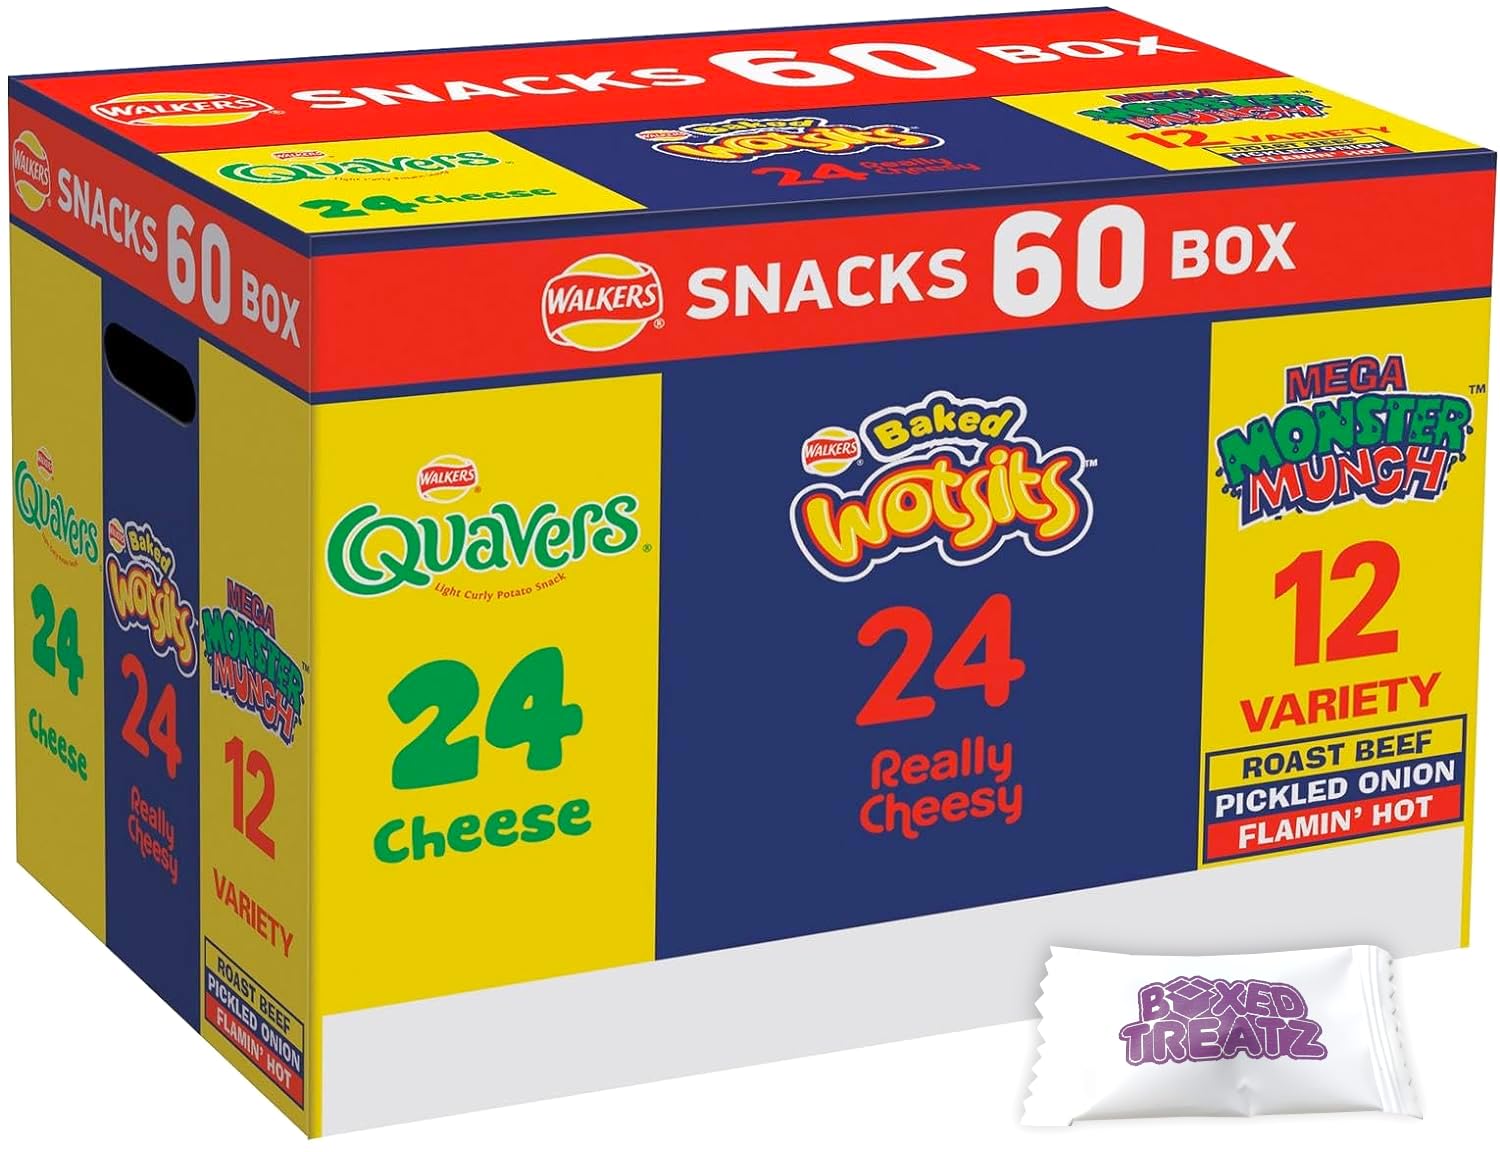 Walkers Crisps Snack Variety Box - Pack of 60